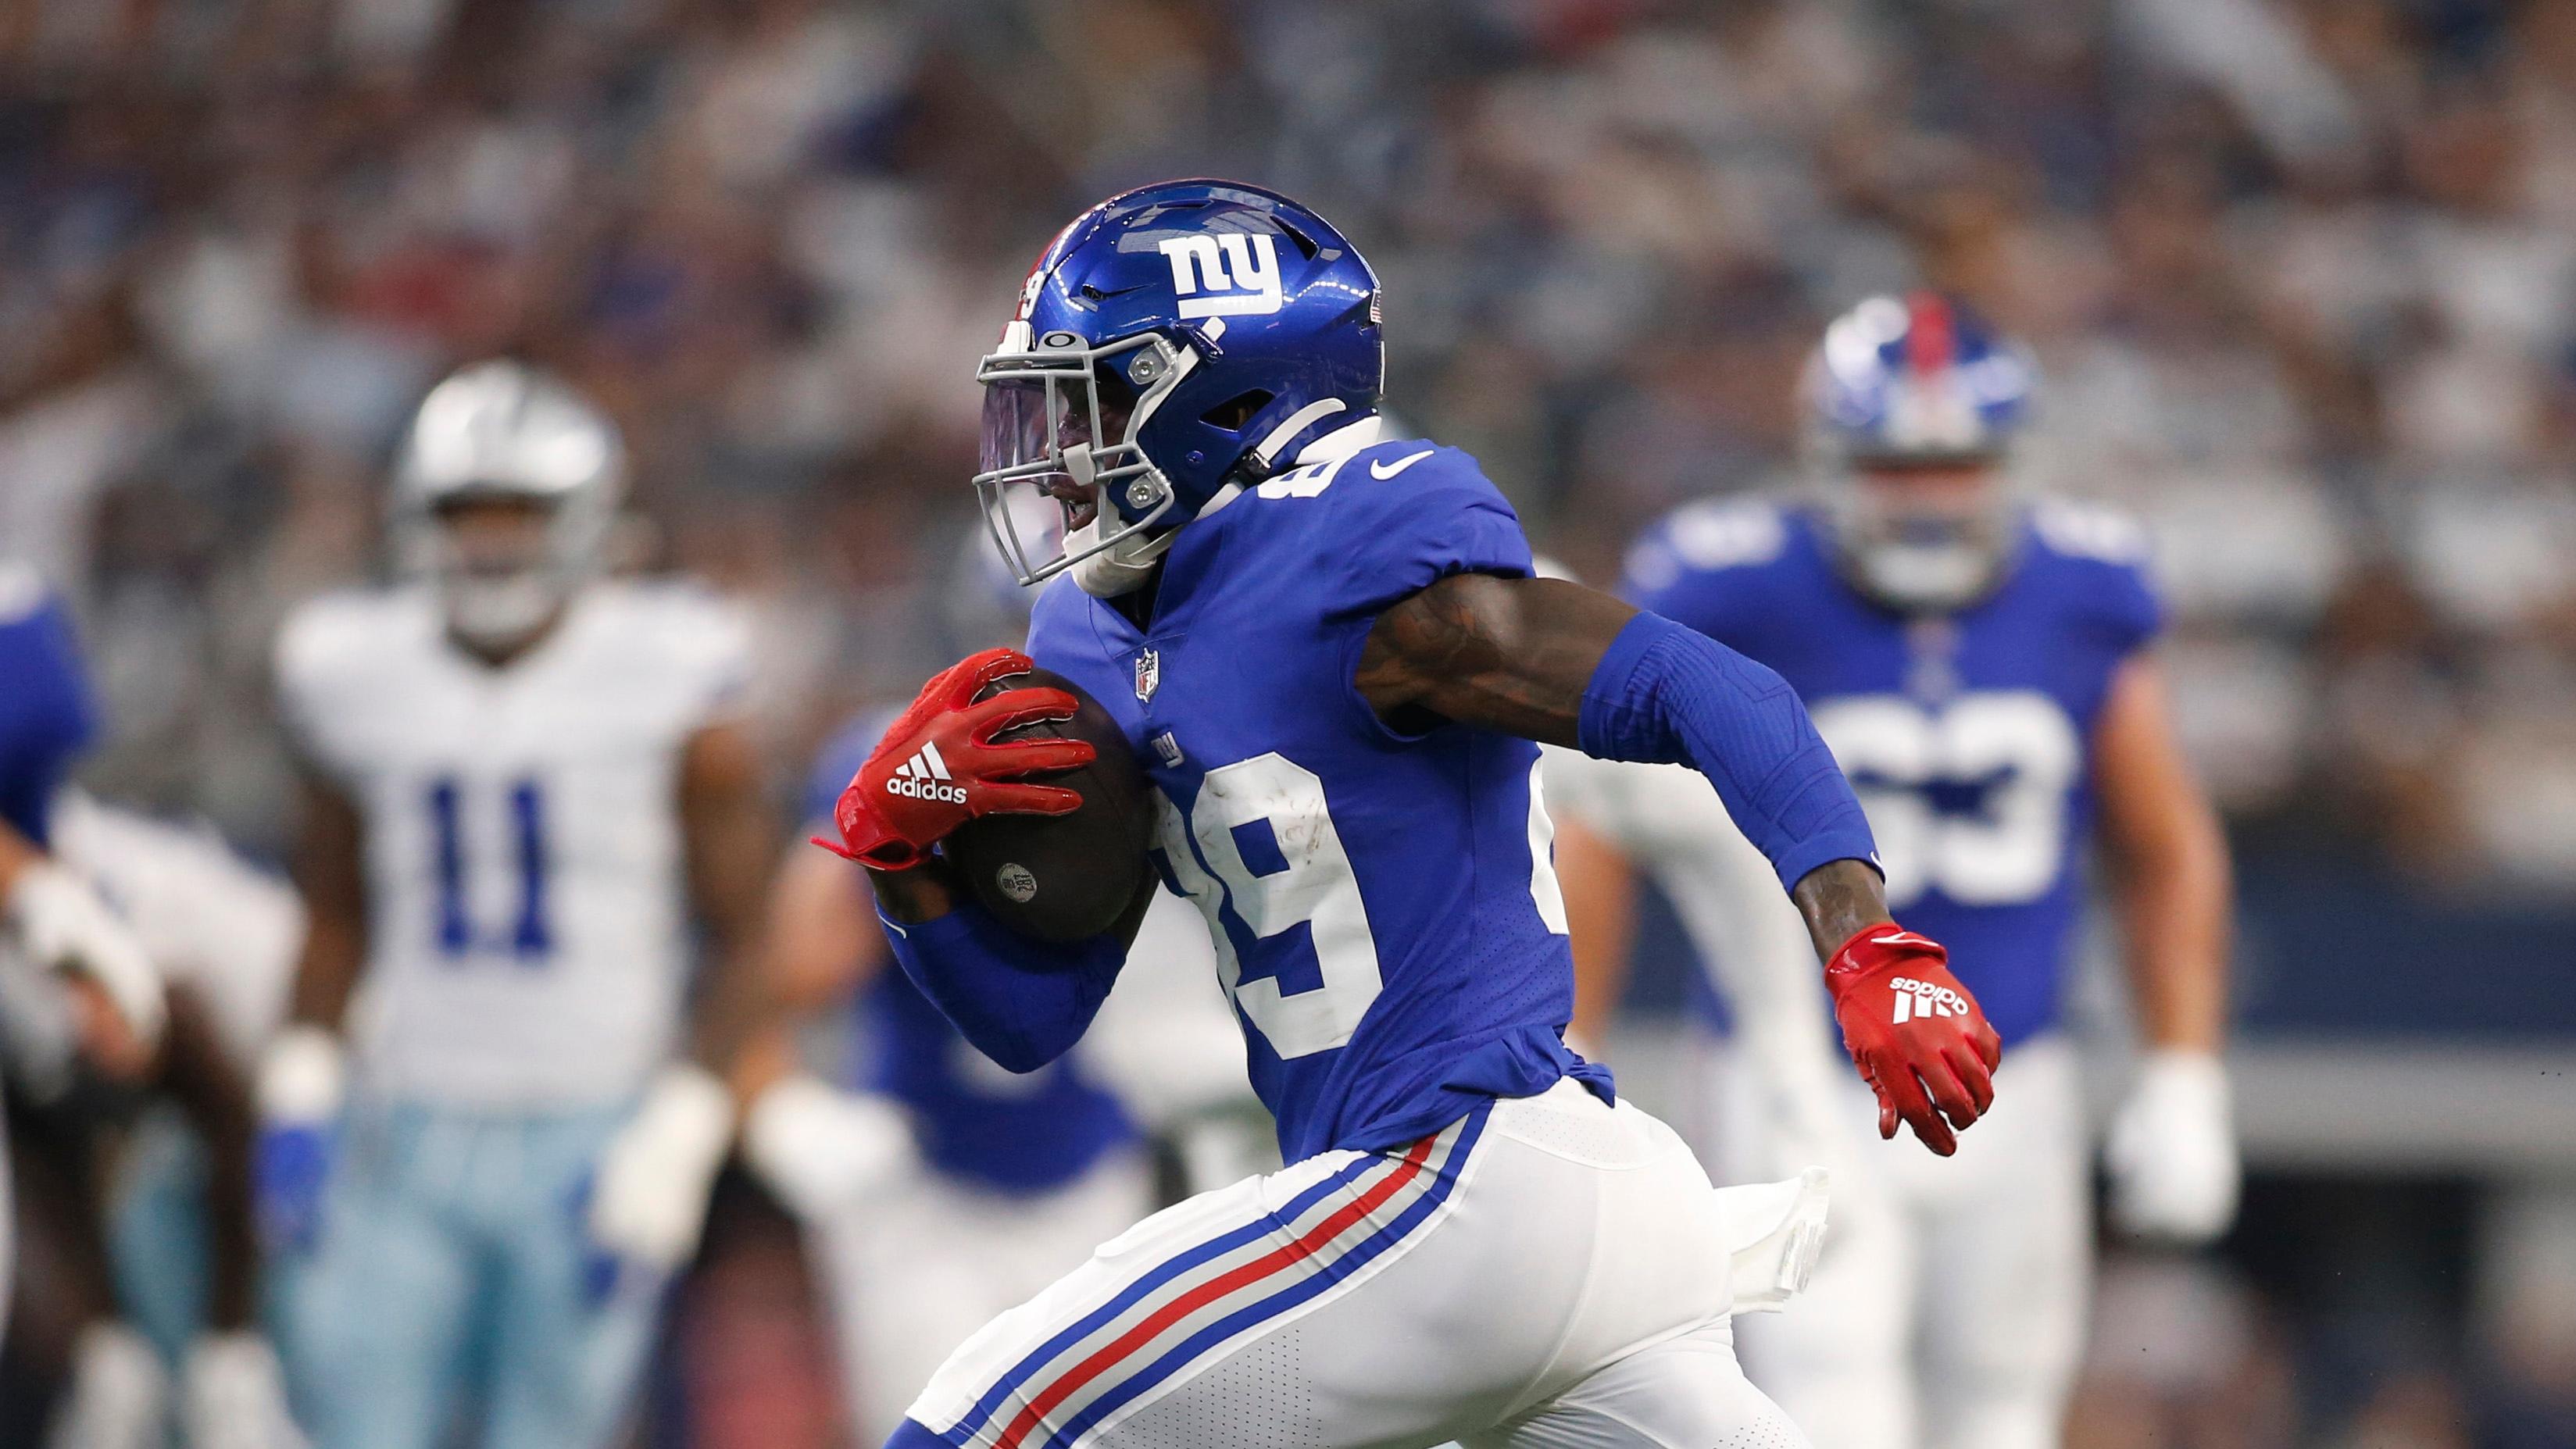 New York Giants wide receiver Kadarius Toney (89) runs after making a catch in the second quarter against the Dallas Cowboys at AT&T Stadium. / Tim Heitman-USA TODAY Sports